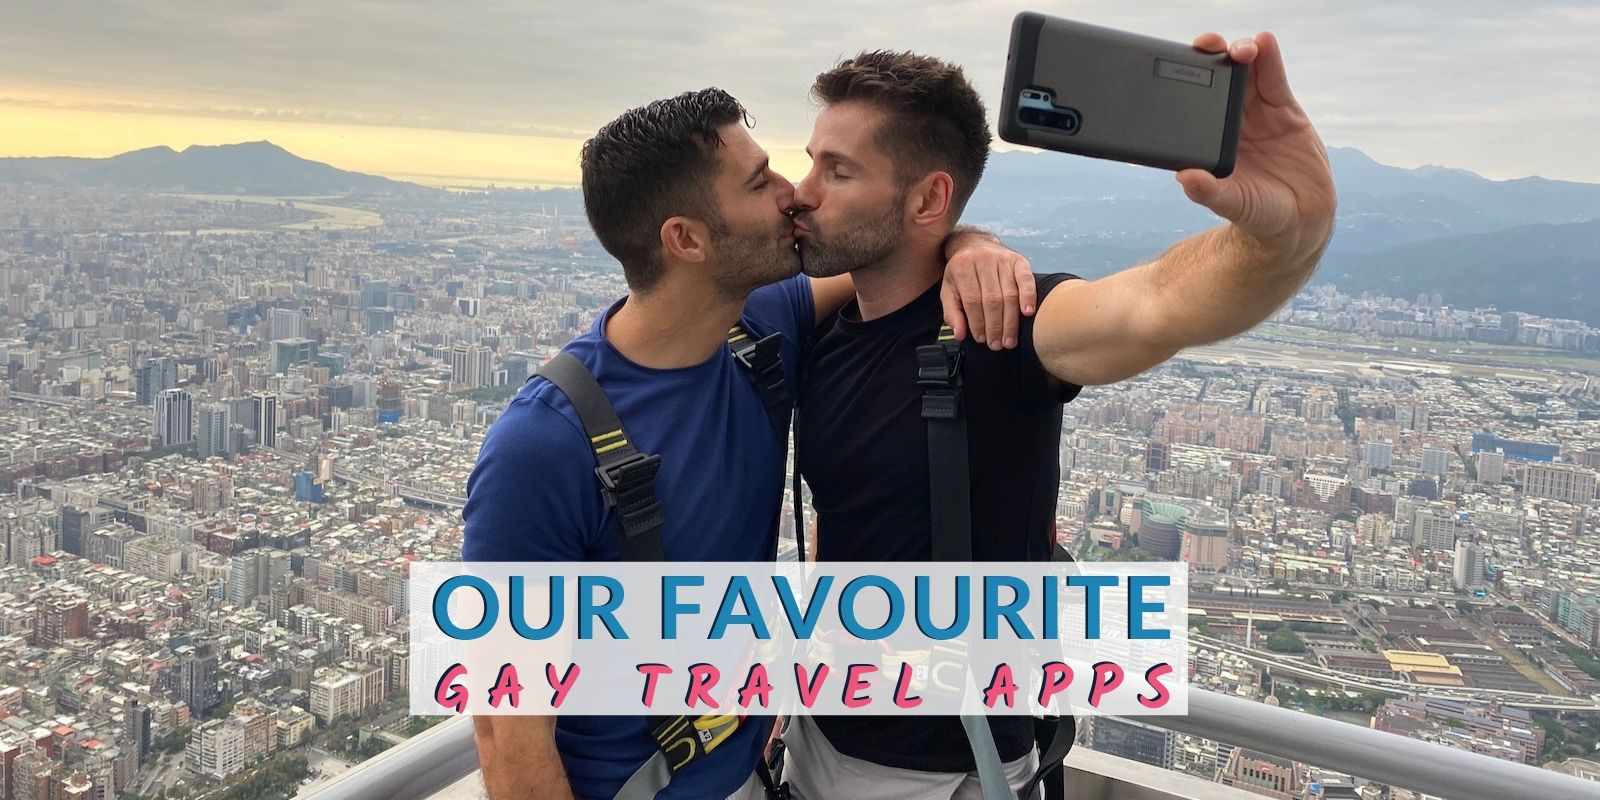 Which app is best for gay?